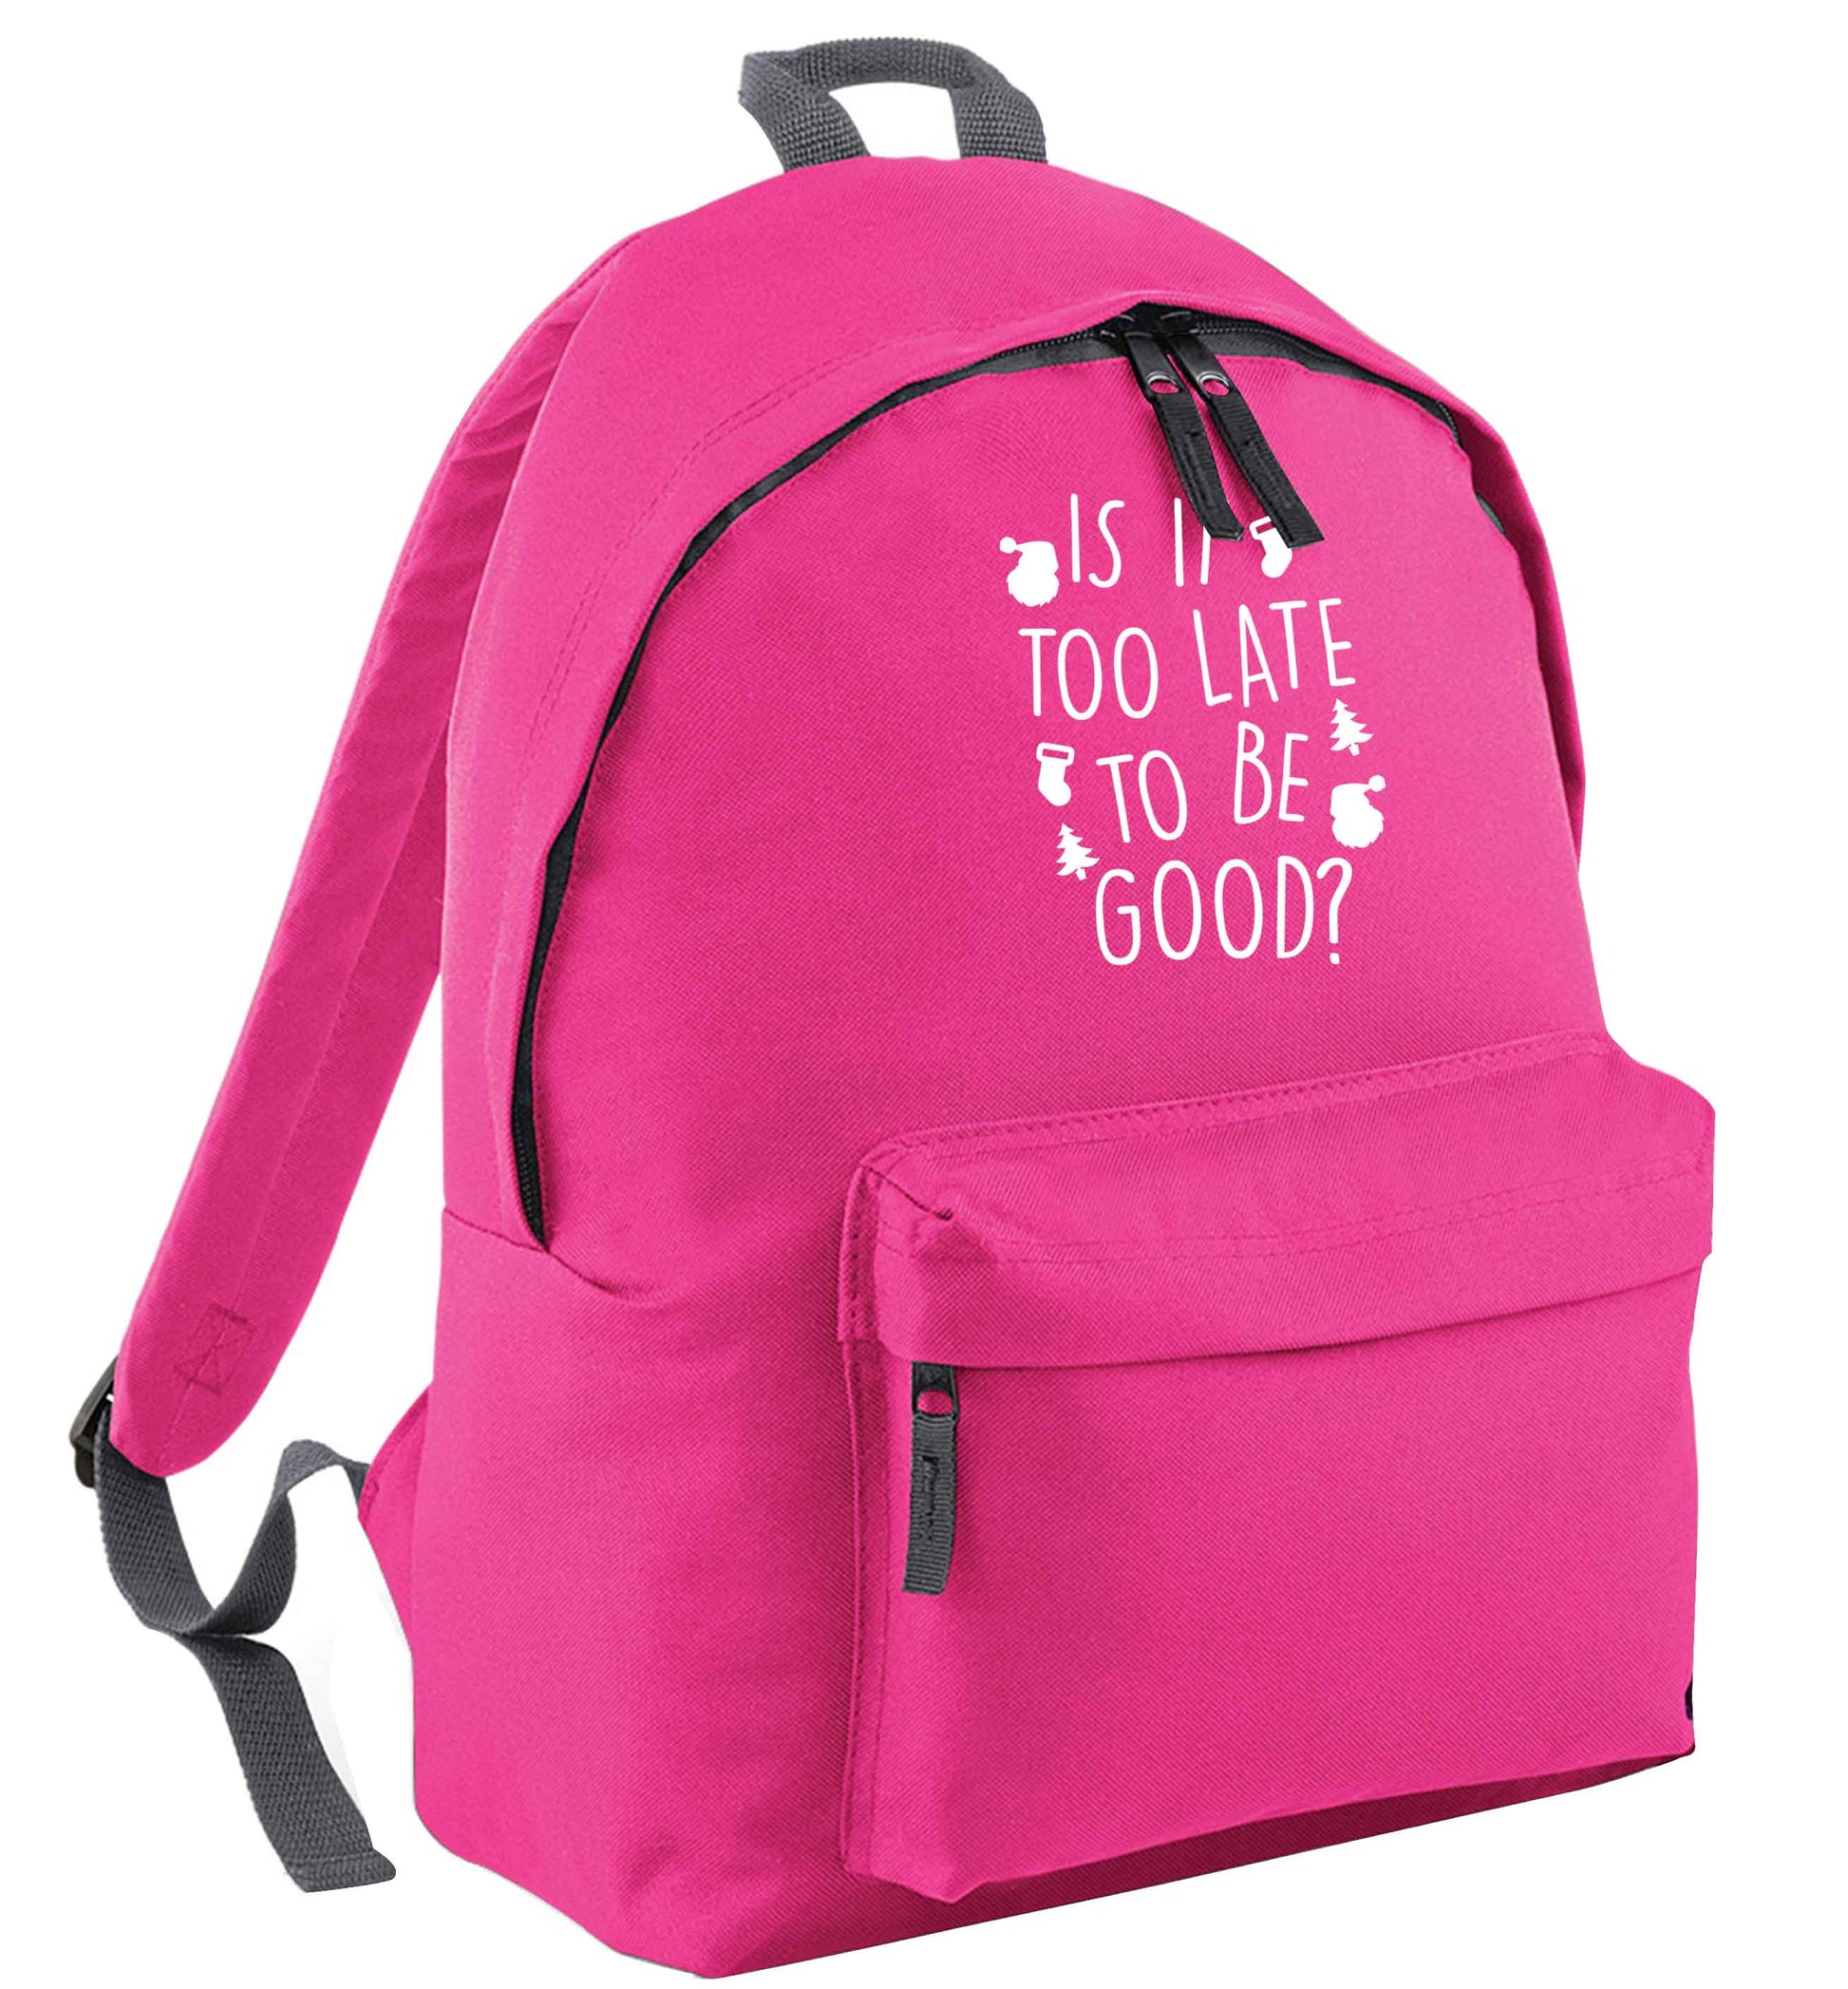 Too Late to be Good pink adults backpack